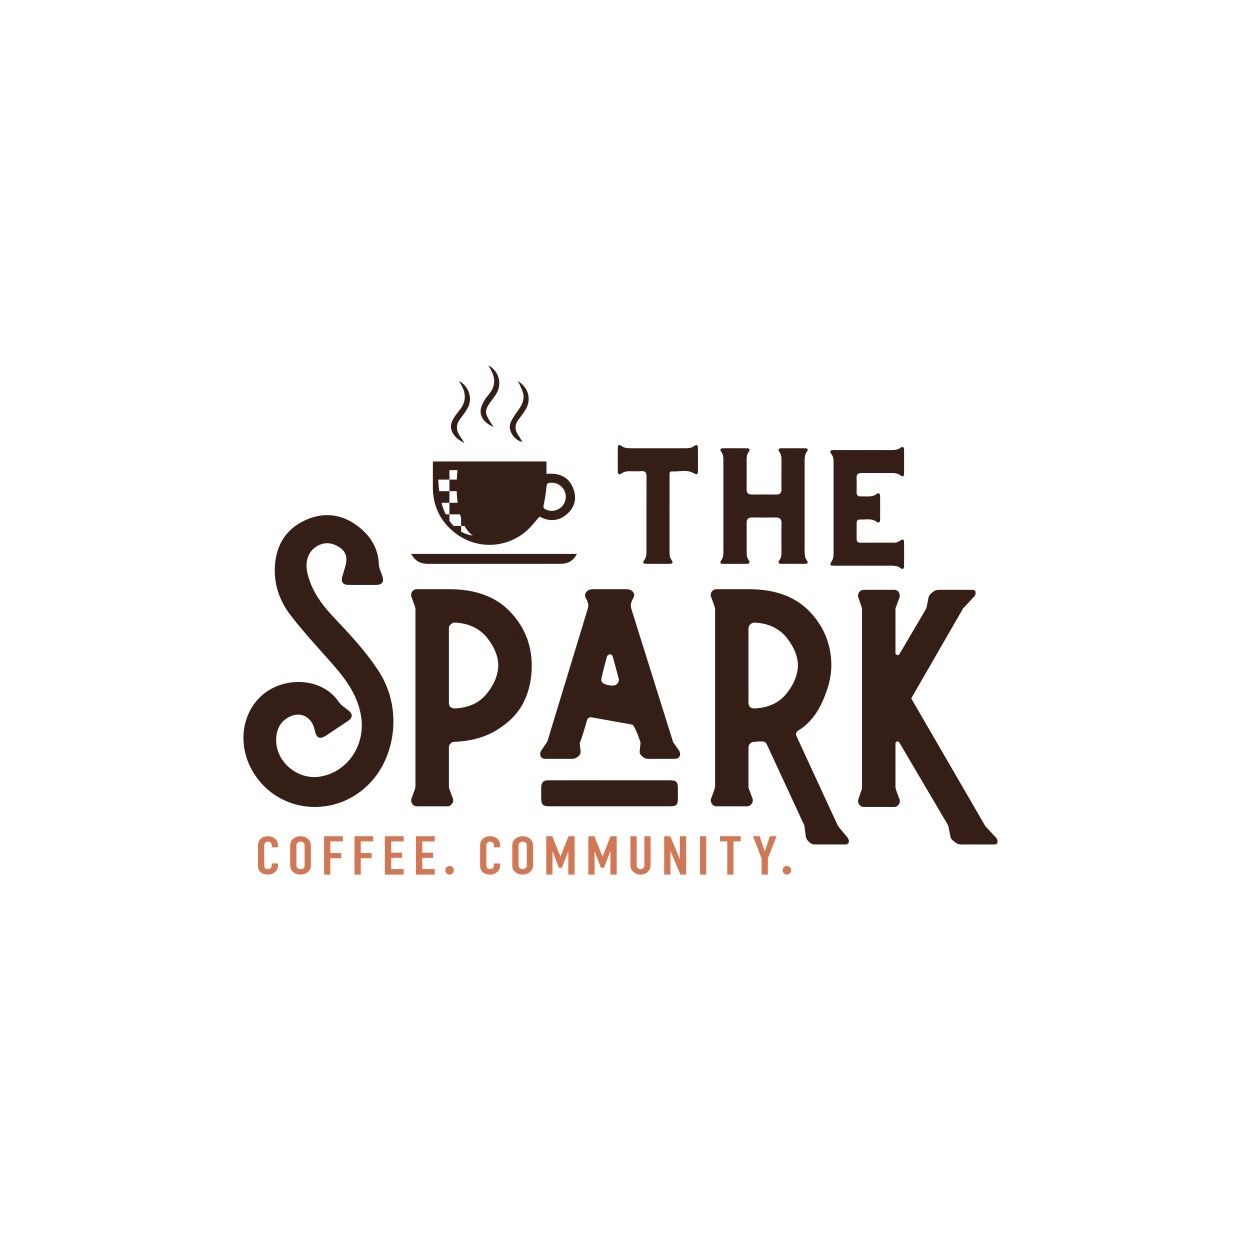 Community begins with coffee - The Spark